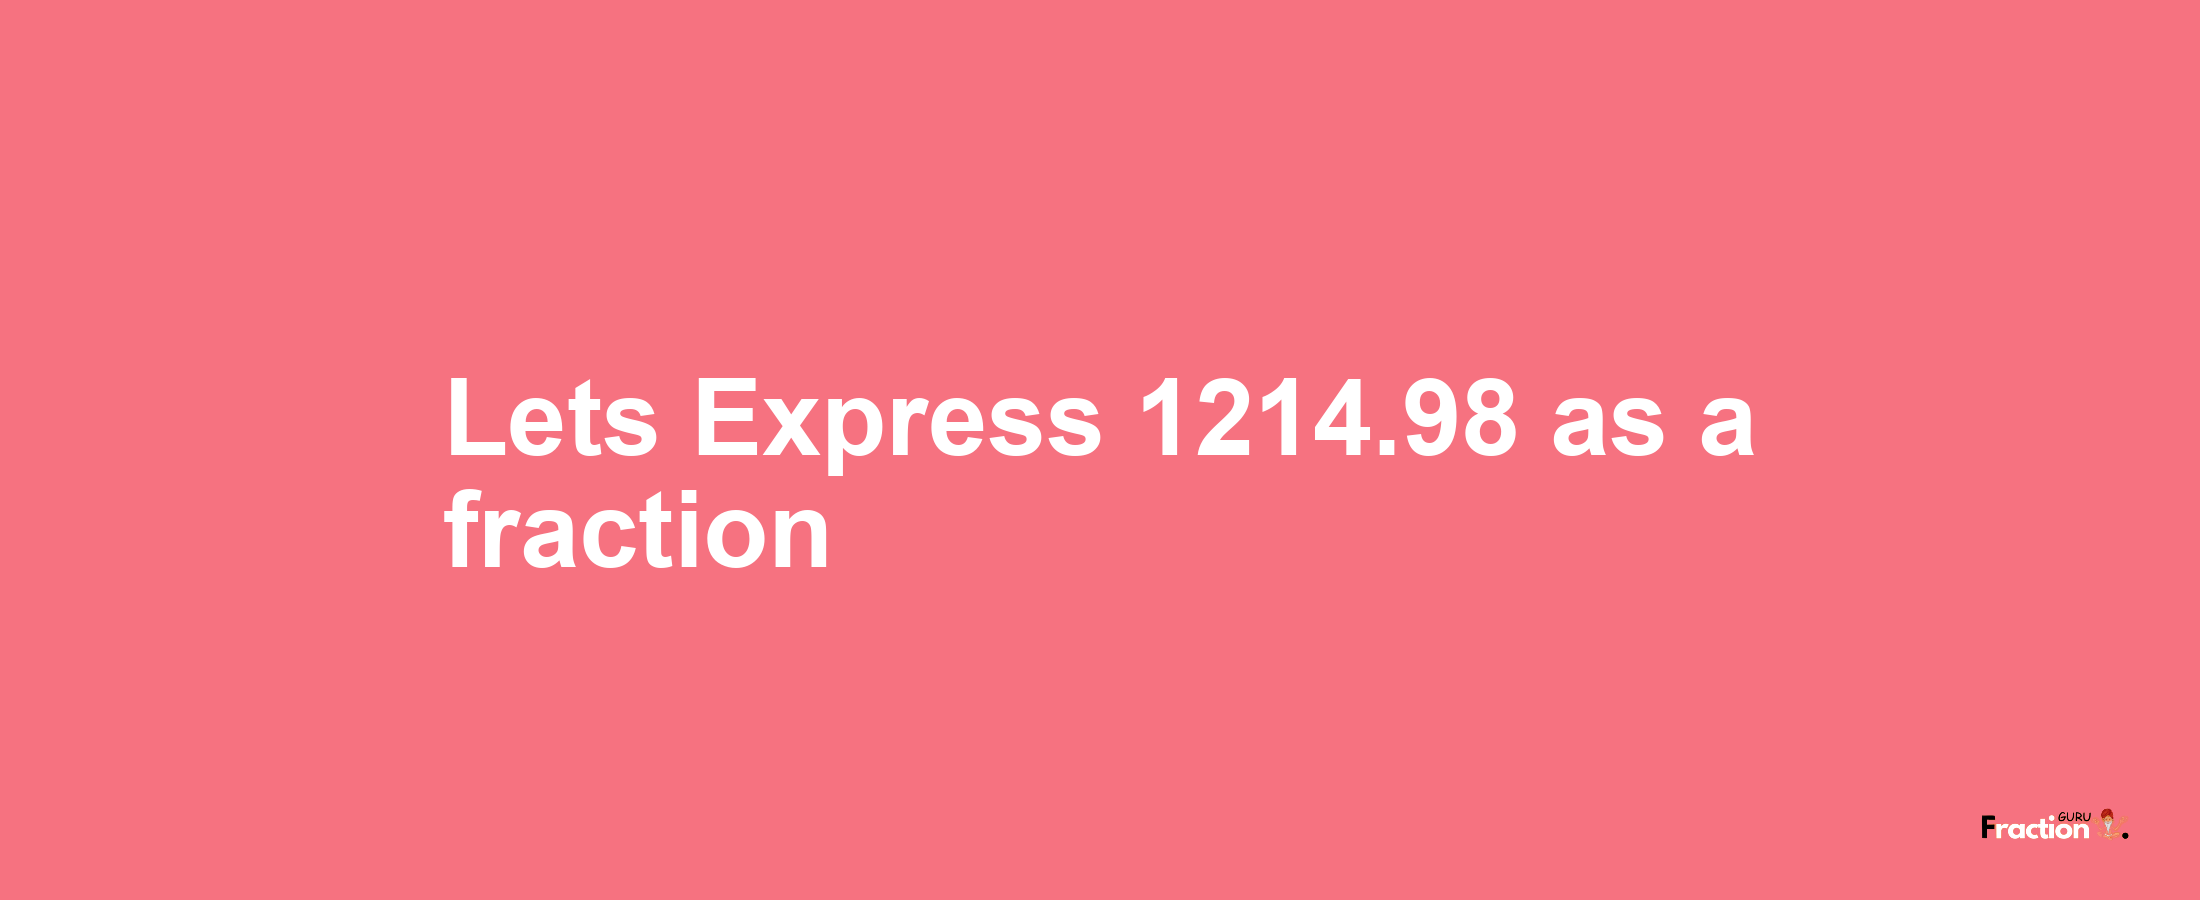 Lets Express 1214.98 as afraction